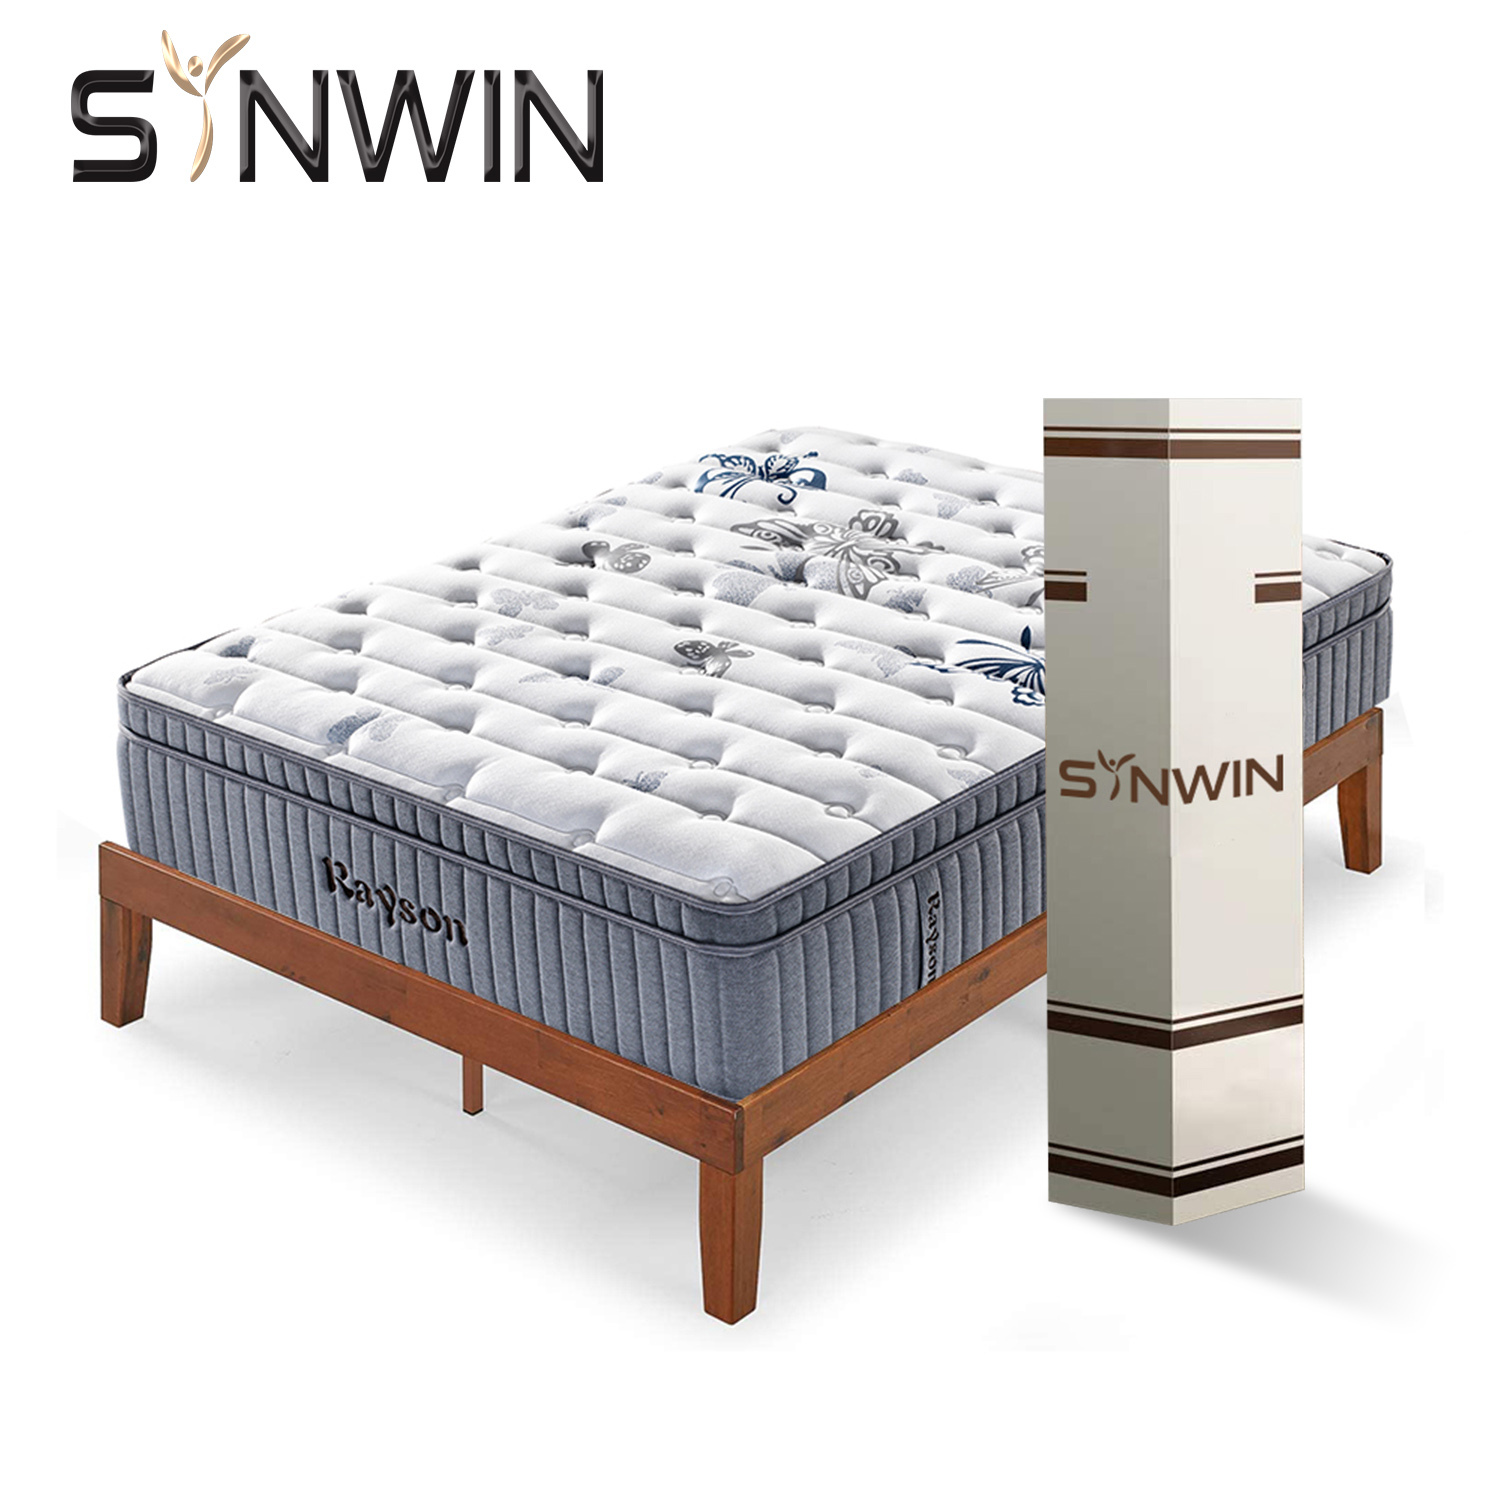 5 star Synwin China factory Euro Top Hot Sale 7 Zone Pocket Spring Hybrid Mattress